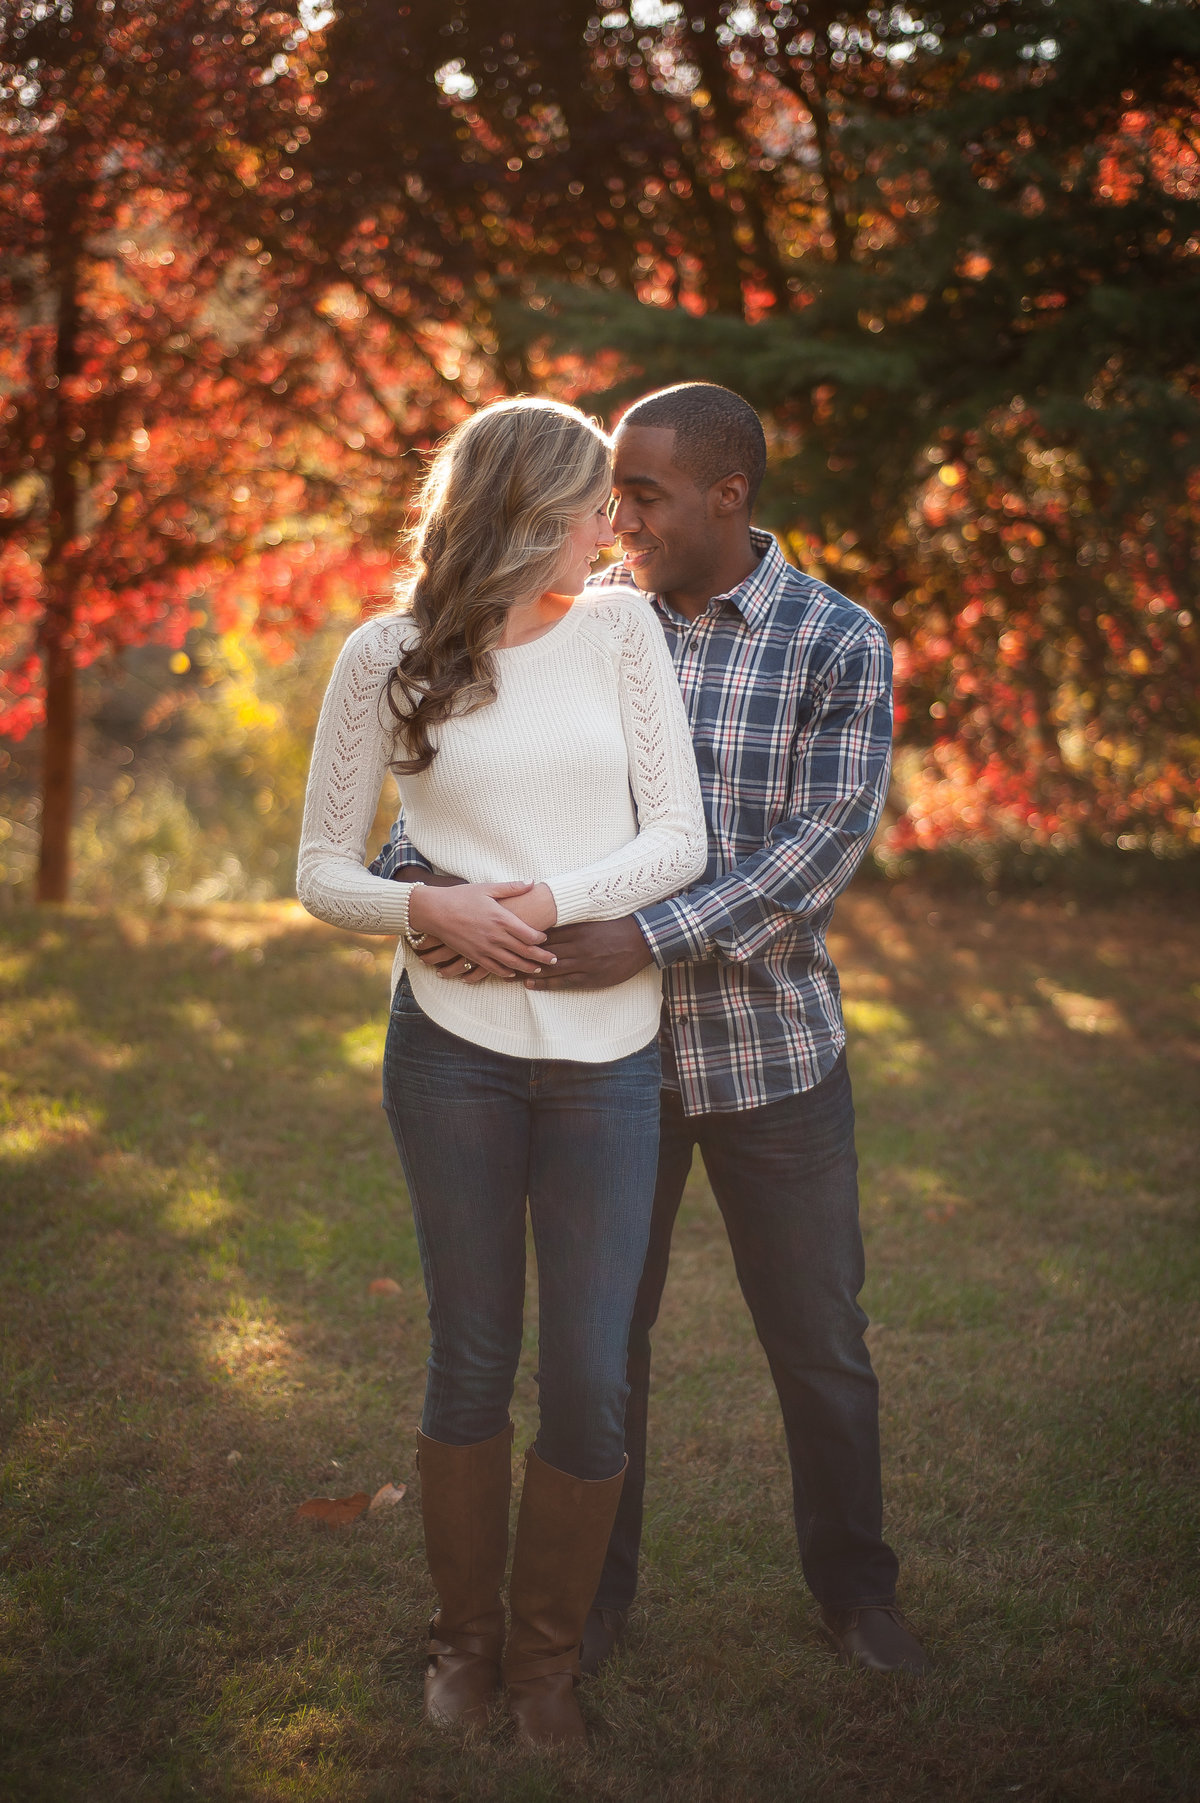 marcy+grant_engaged_jtp2016-22